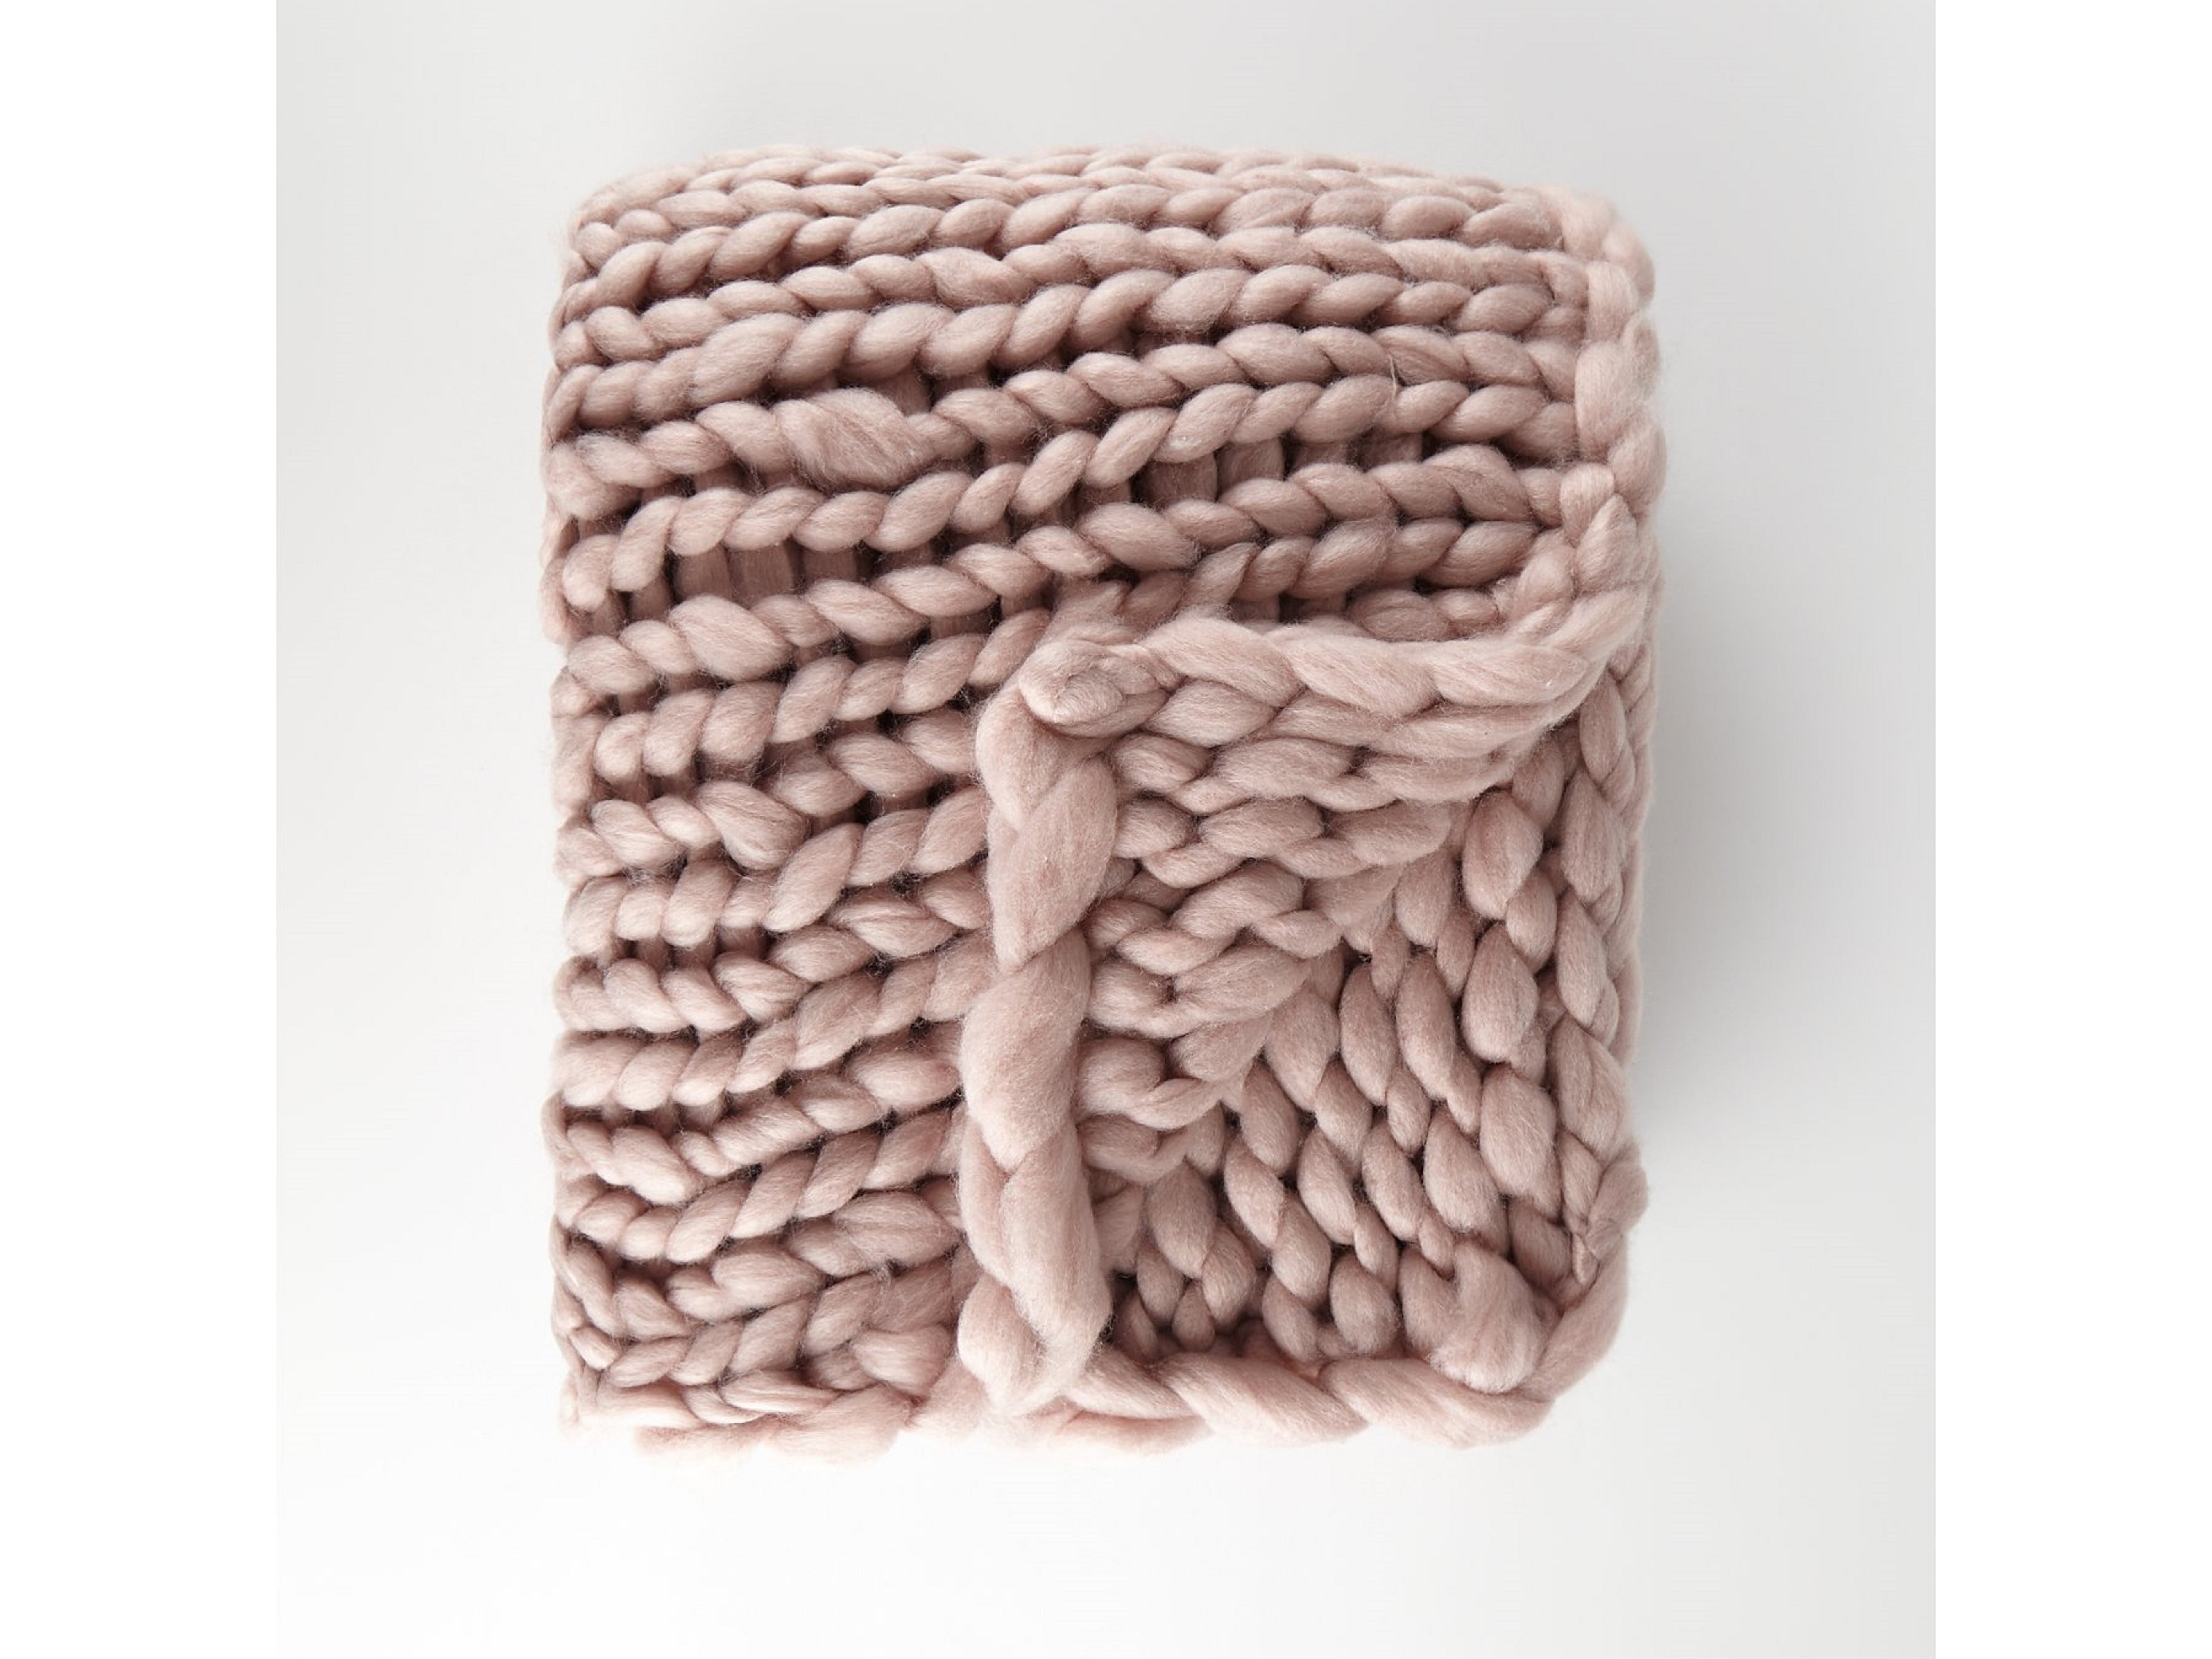 6 George Home Pink Chunky Hand Knitted Throw £30.jpg